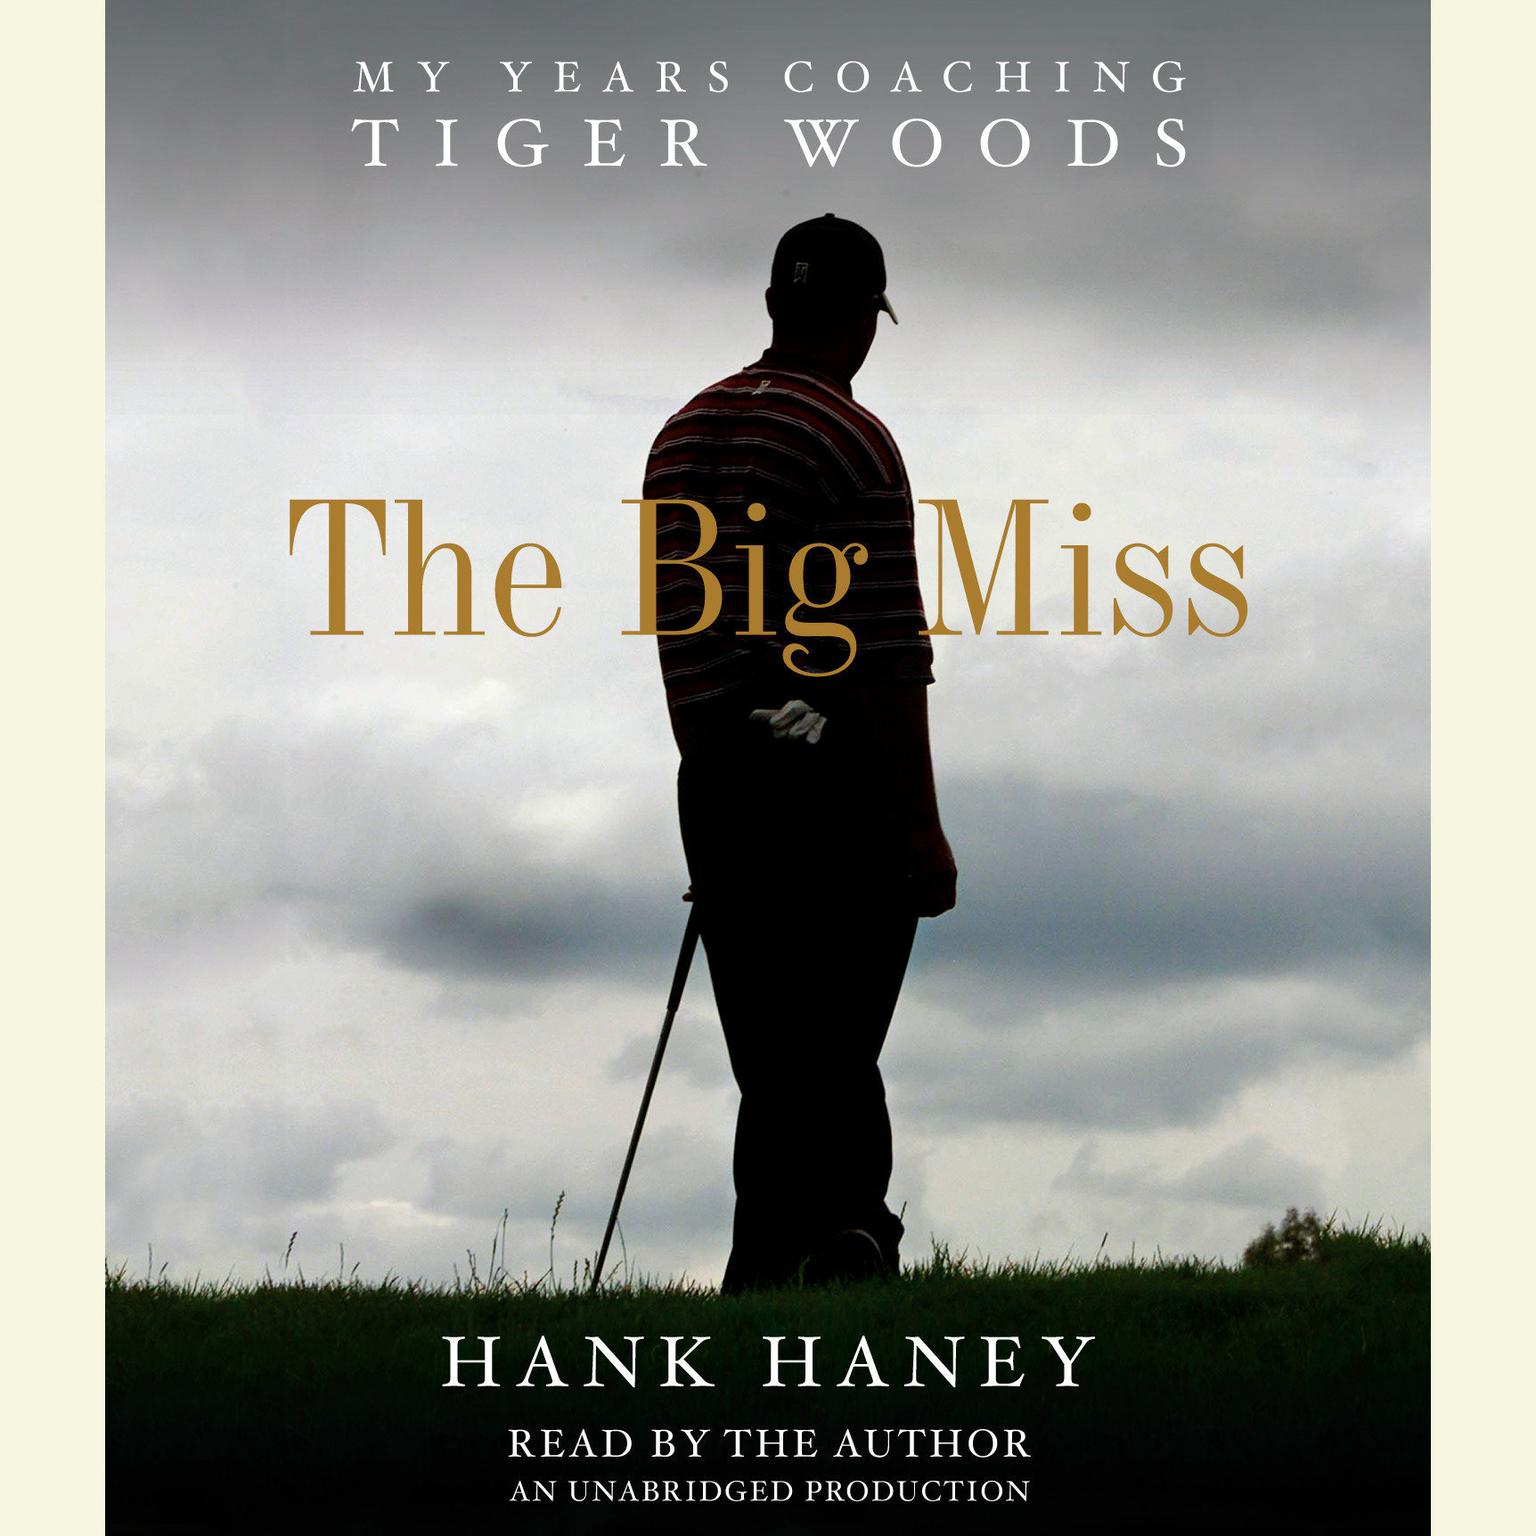 The Big Miss: My Years Coaching Tiger Woods Audiobook, by Hank Haney